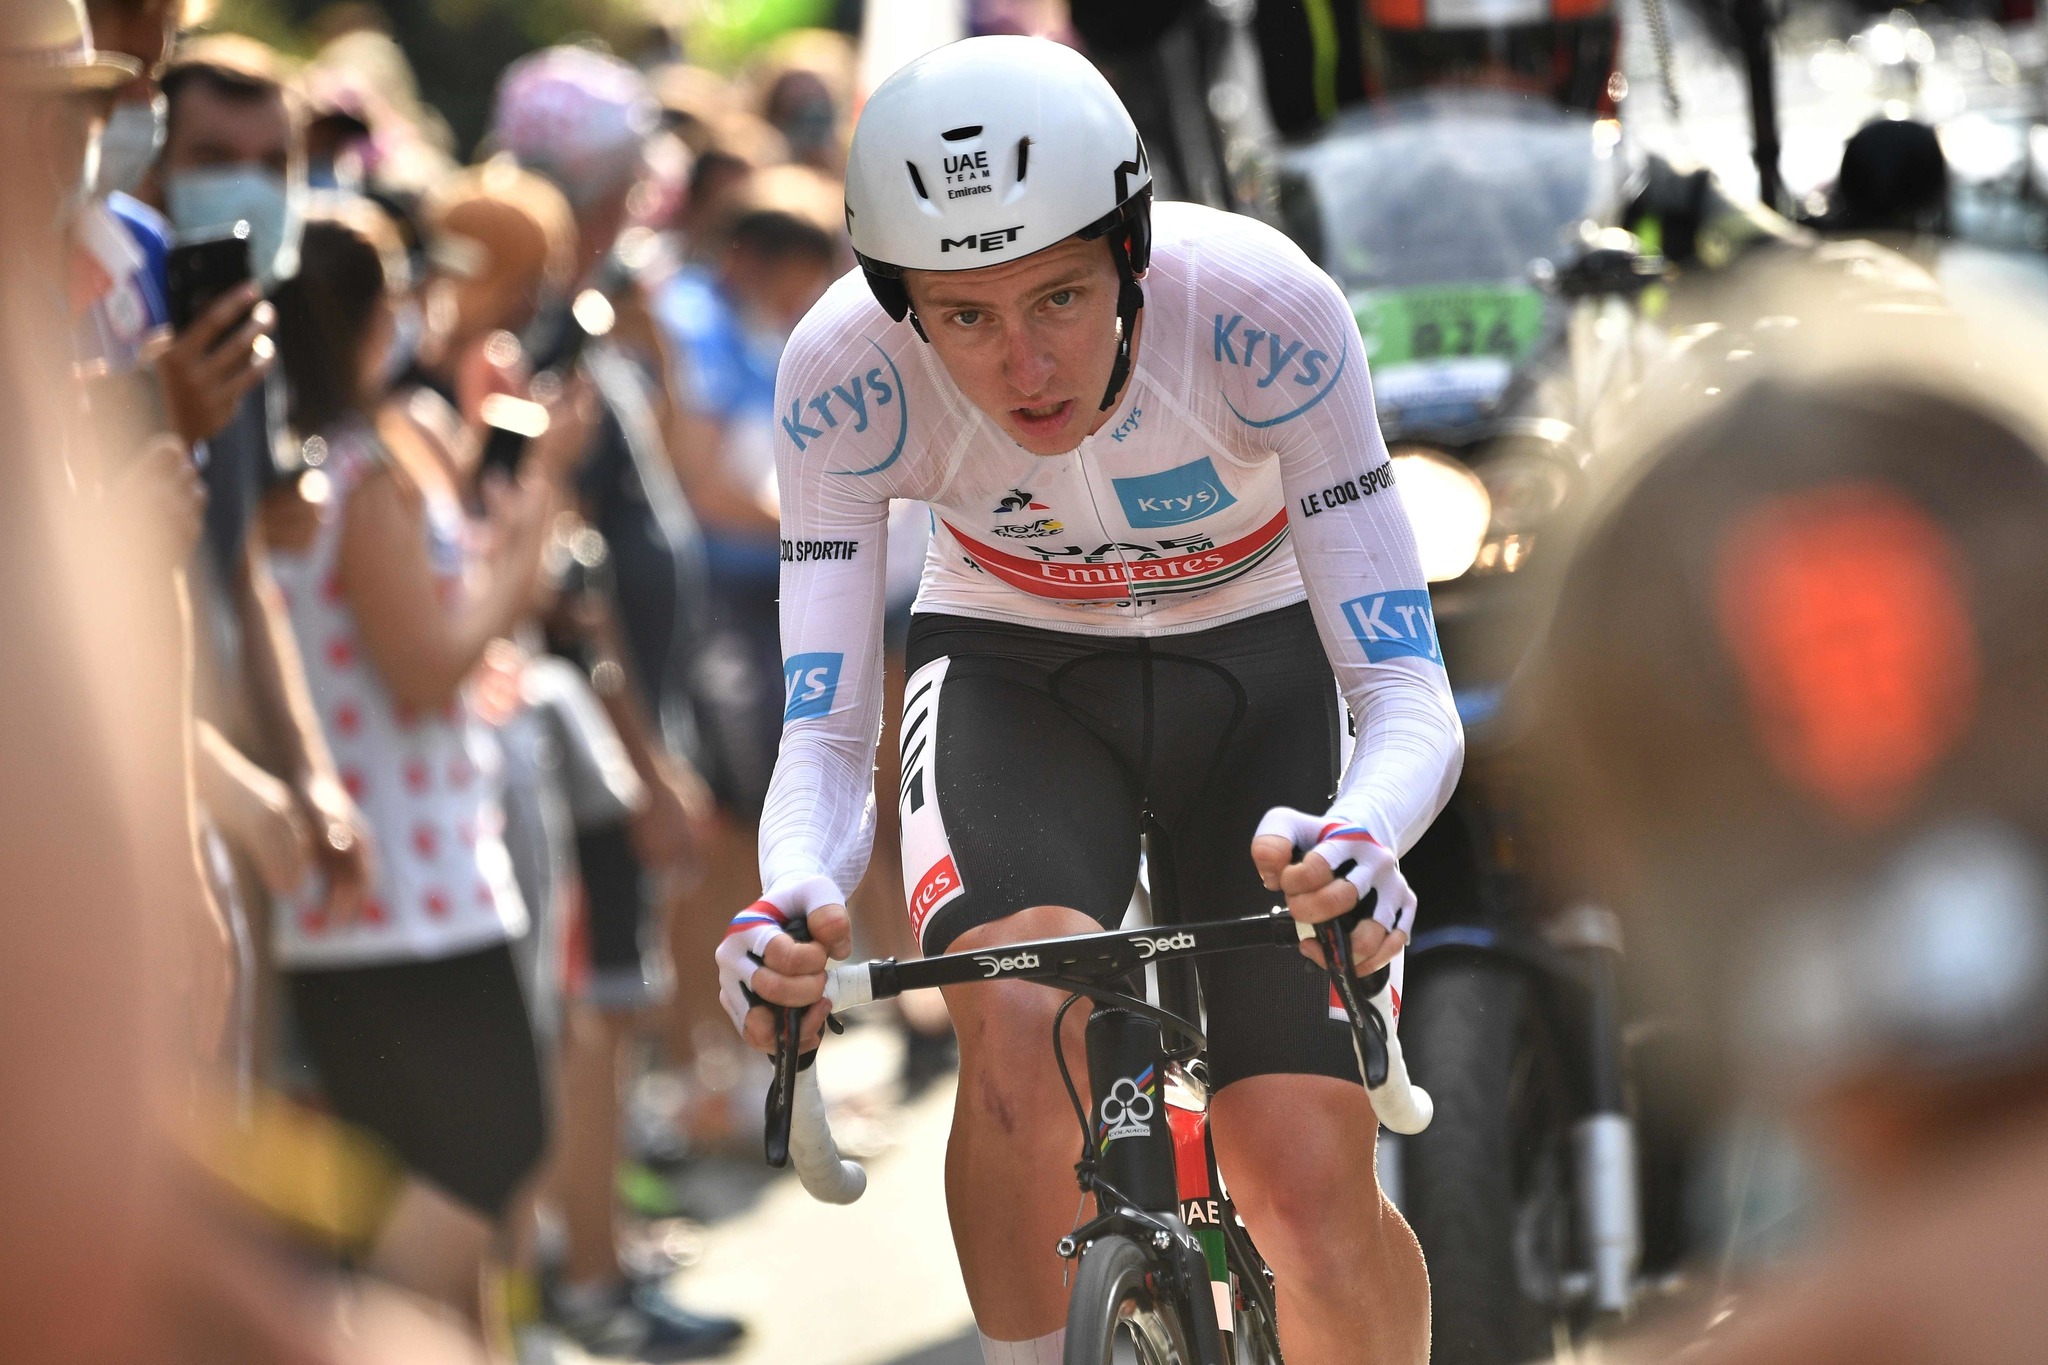 TOPSHOT - Team UAE Emirates rider Slovenia's Tadej lt;HIT gt;Pogacar lt;/HIT gt; wearing the best young's white jersey rides during the 20th stage of the 107th edition of the Tour de France cycling race, a time trial of 36 km between Lure and La Planche des Belles Filles, on September 19, 2020. (Photo by Anne-Christine POUJOULAT / AFP)